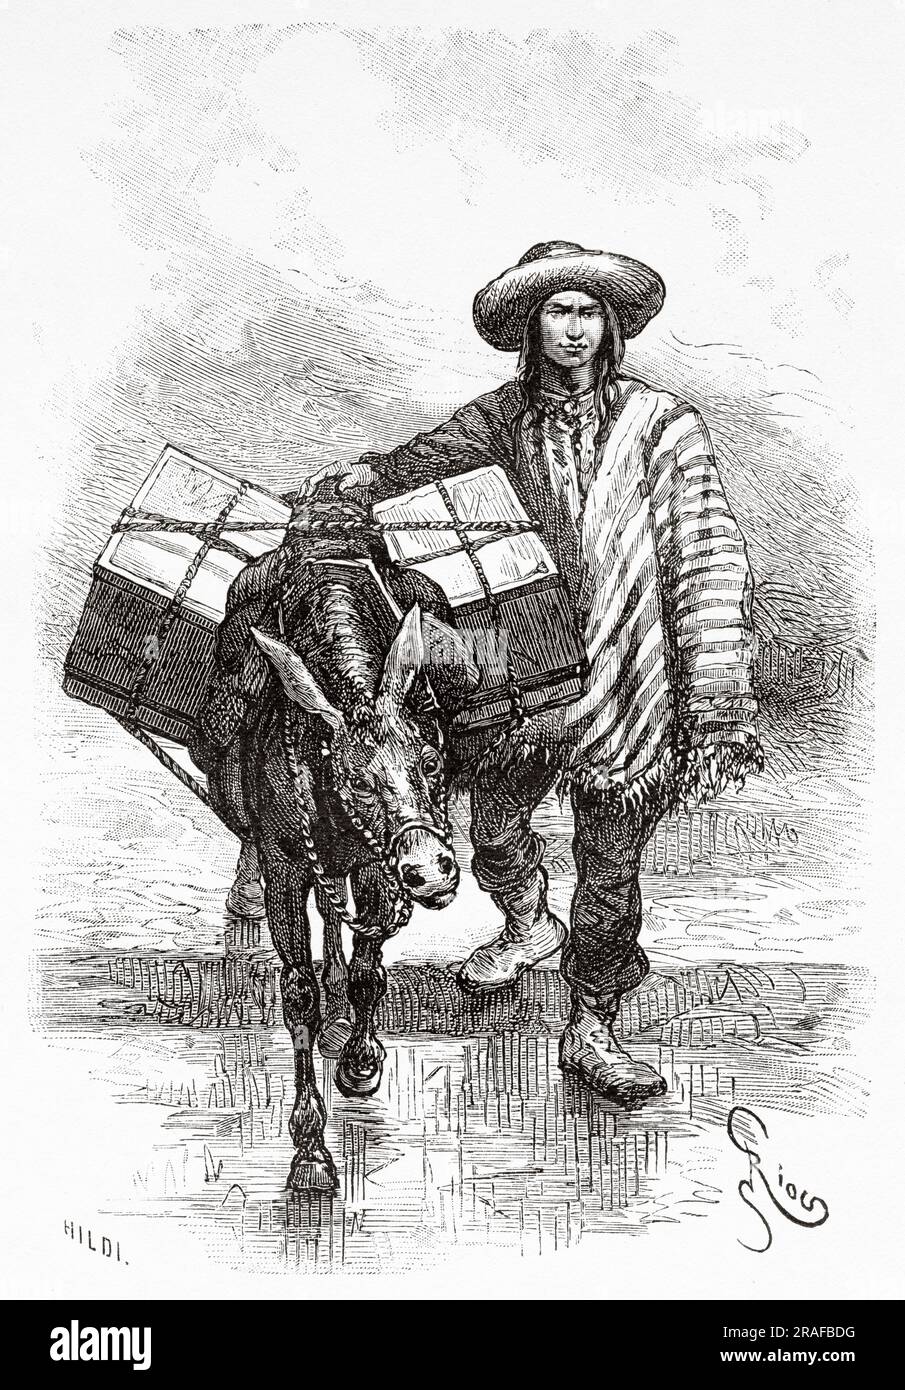 Bolivian indigenous man driving a loaded mule, Bolivia, South America. Journey in search of the remains of the Crevaux mission by Émile-Arthur Thouar 1884. Old 19th century engraving from Le Tour du Monde 1906 Stock Photo